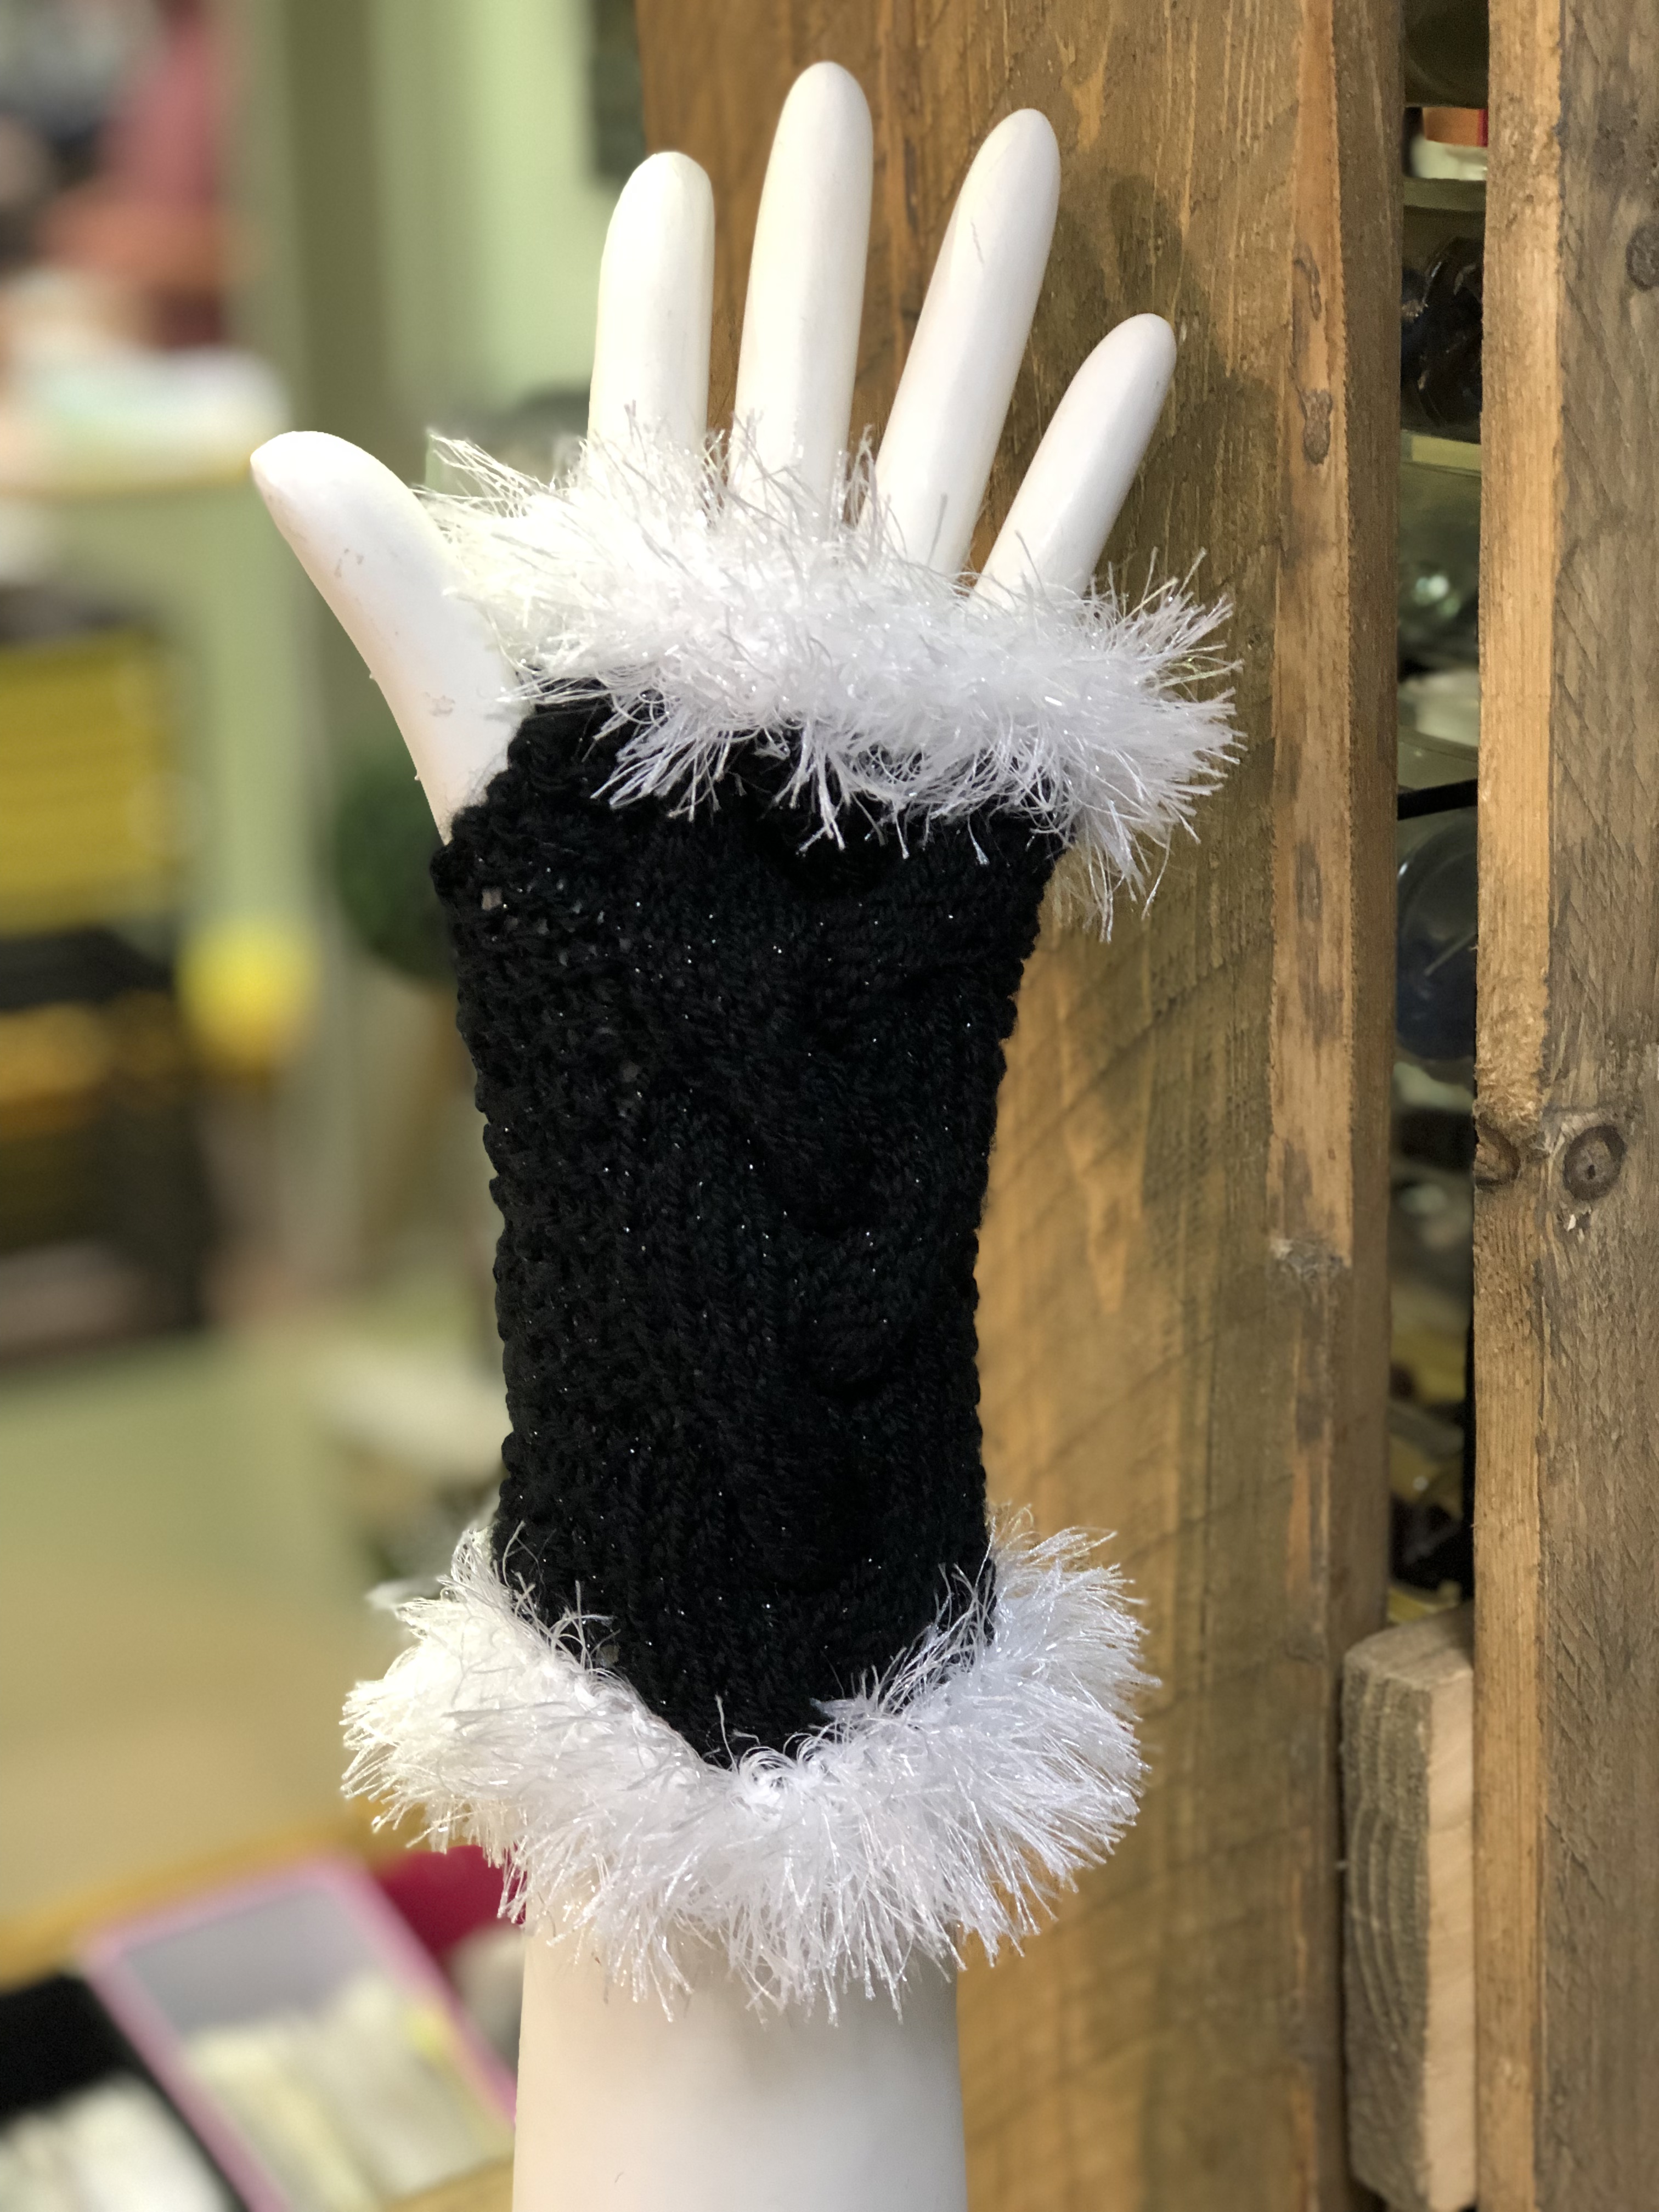 Knitted Hand Warmer Jet Black With Tinsel Yarn